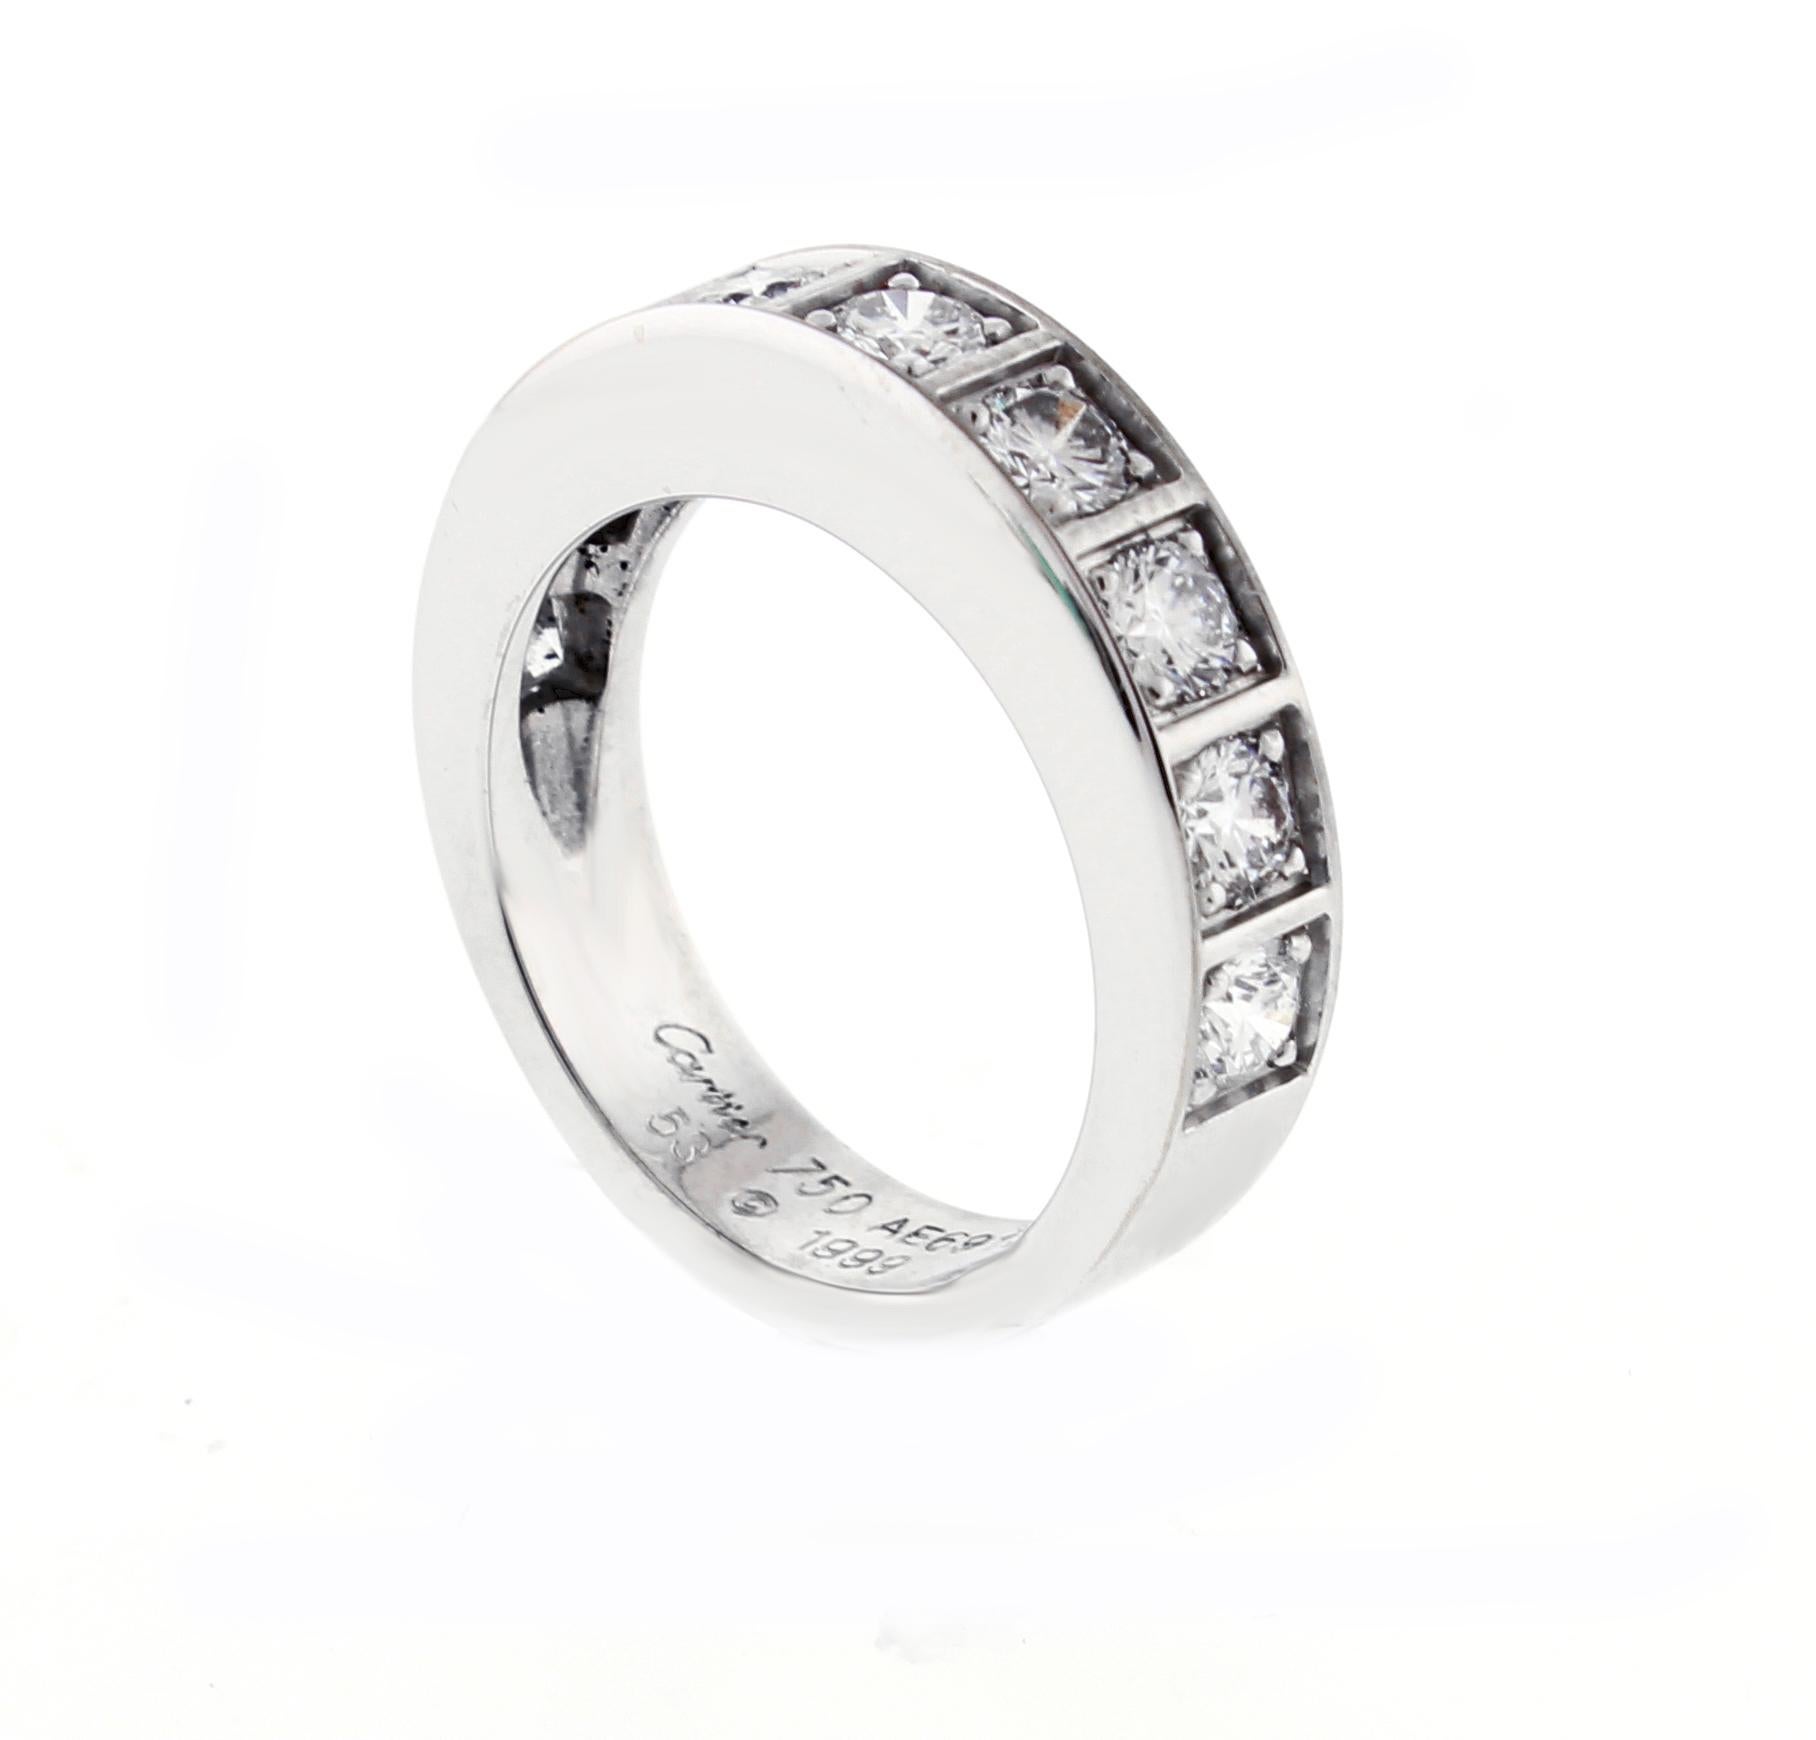 From Cartier's Lanières collection,  a part circle diamond band ring.
♦ Designer: Cartier
♦ Metal: 18 karat white gold
♦ 9 diamonds=1.62 caratE_F VVS
♦ 8mm wide
♦ Circa 1999
♦ Size  6 ¾ US,  53 French , some adjustment
♦ Packaging: Cartier box
♦